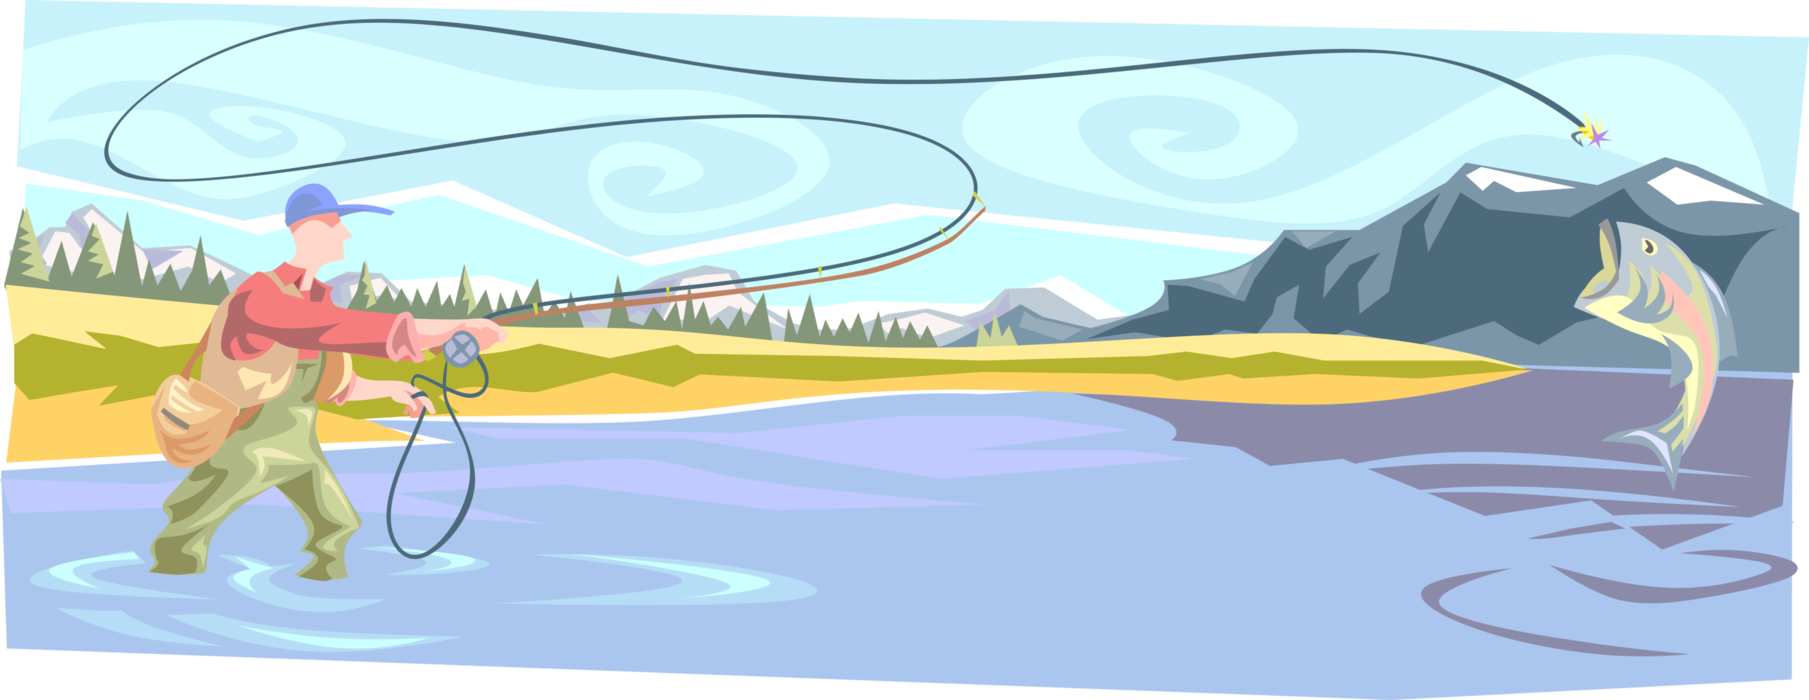 Vector Illustration of Fly Fisherman Angler Casting and Catching Fish in River